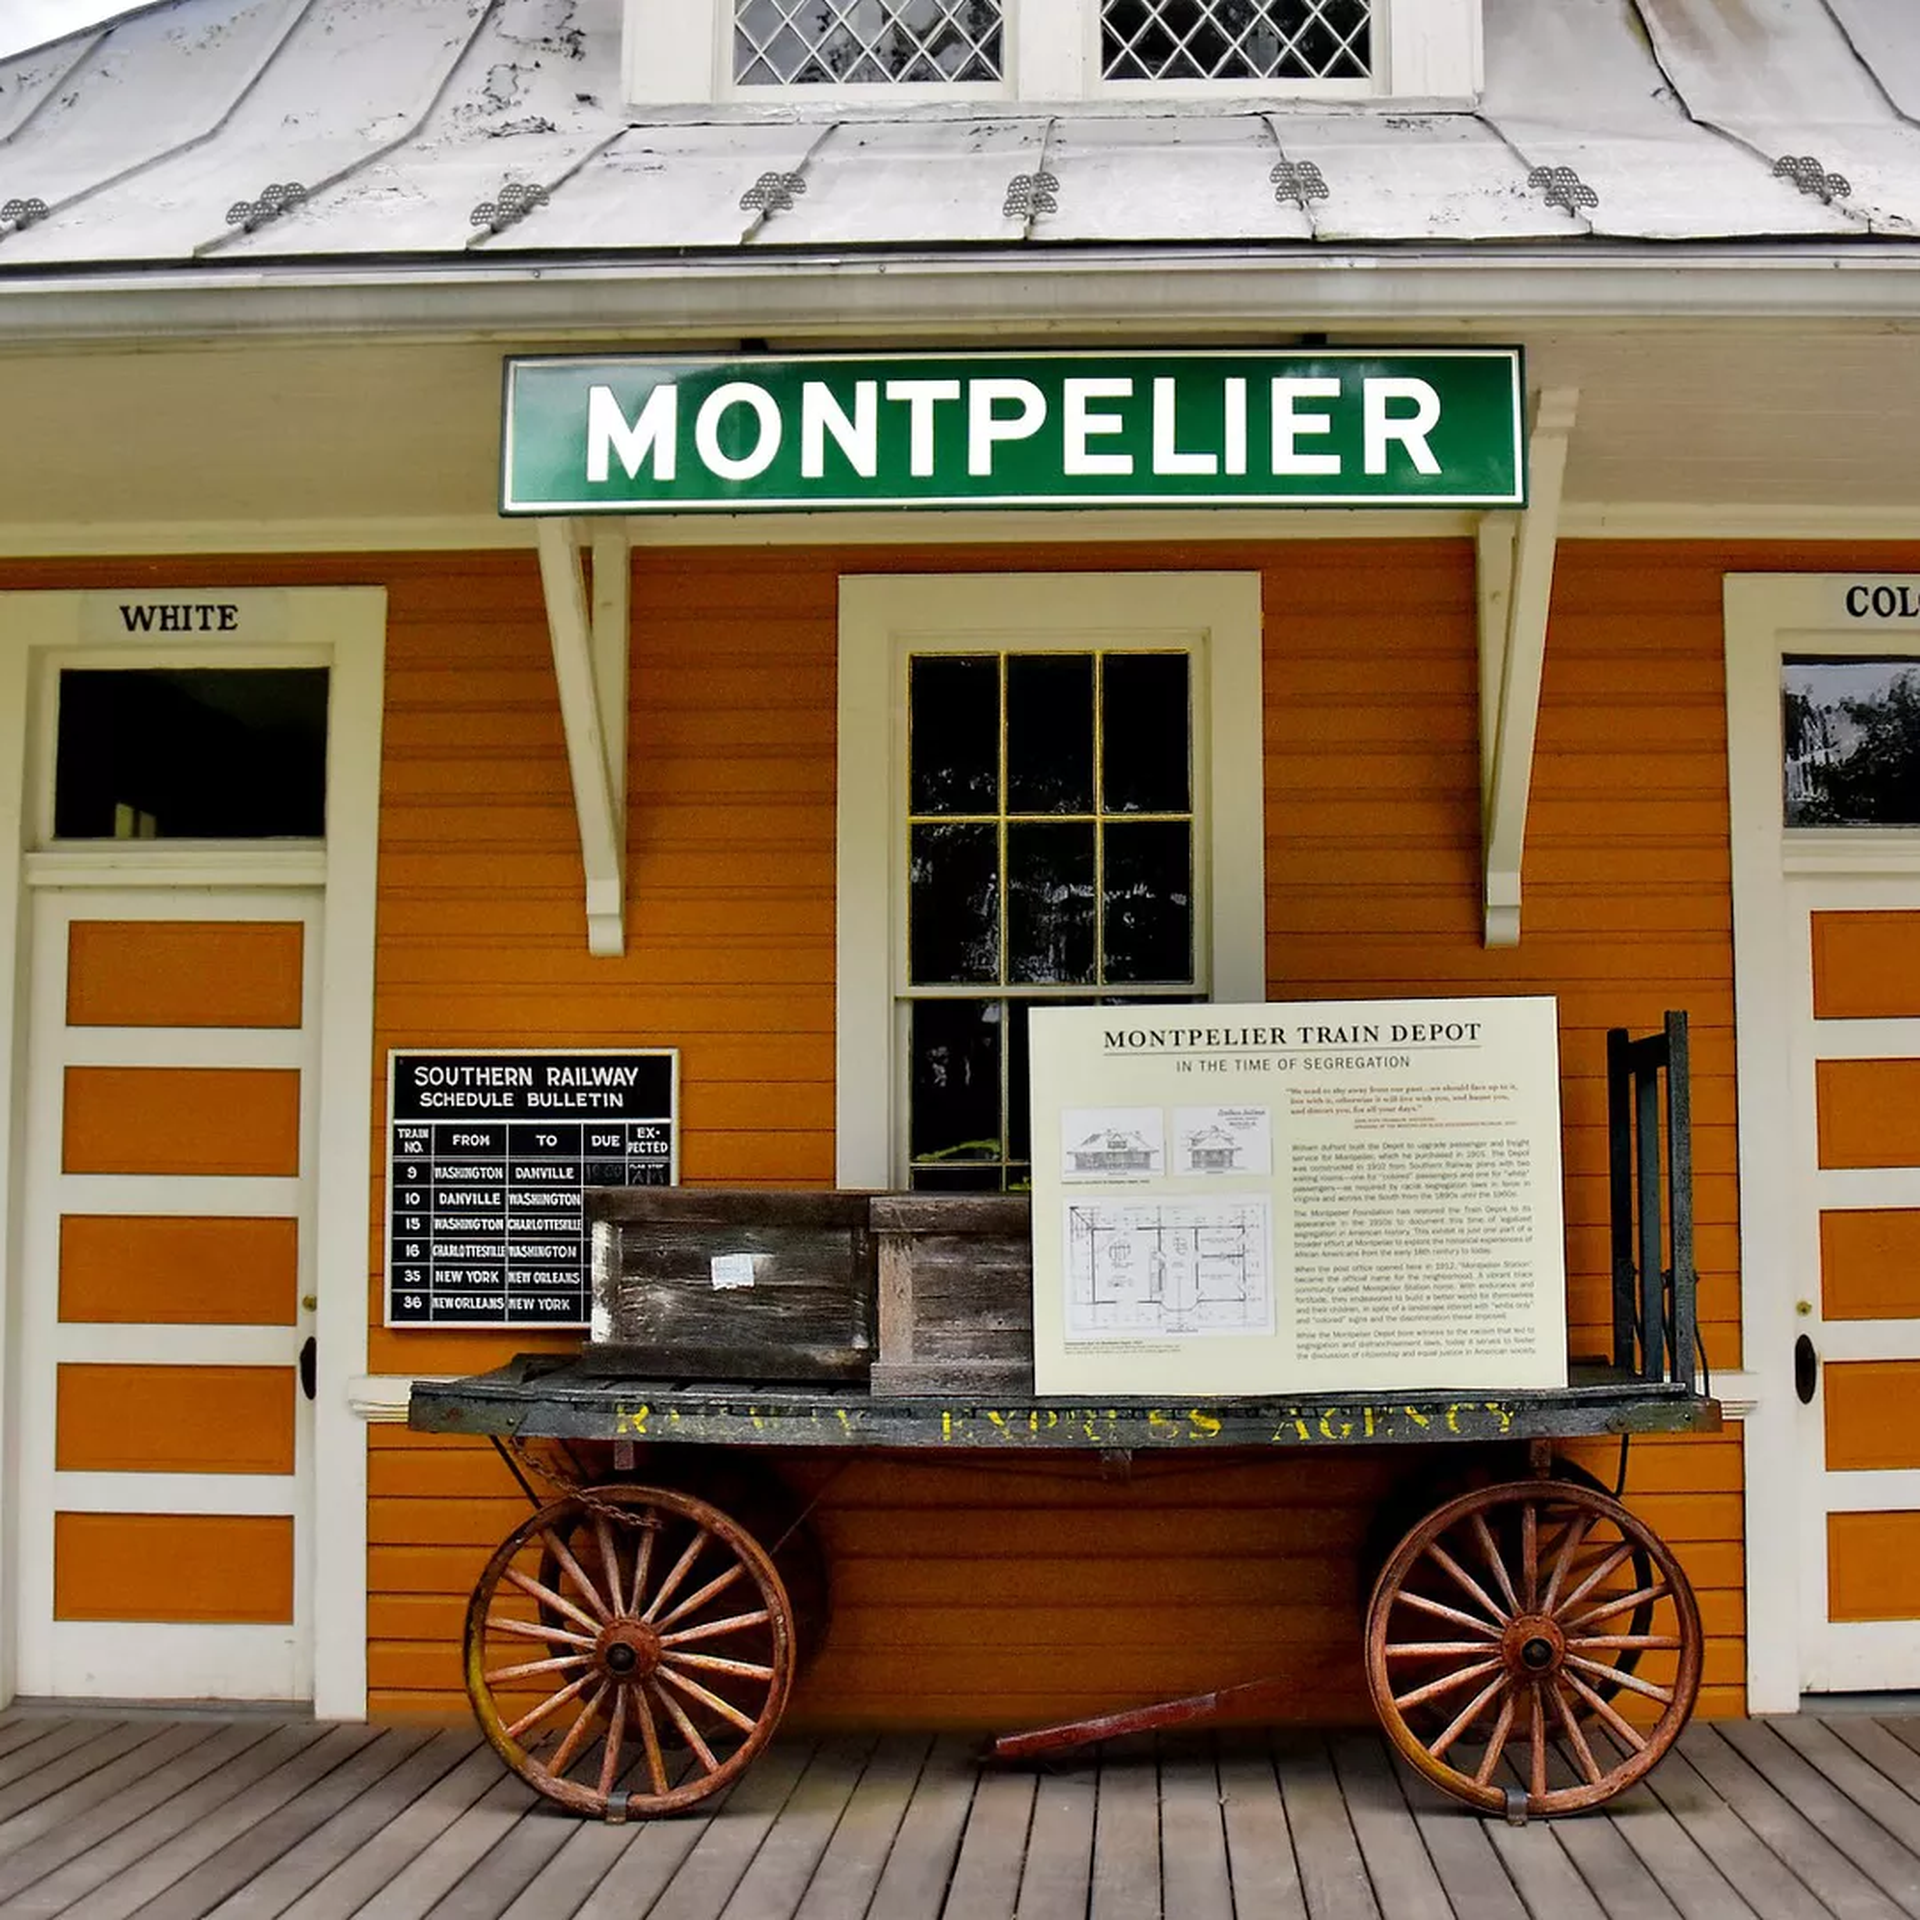 the outside of an orange building that looks old timey and says montpiler on it.